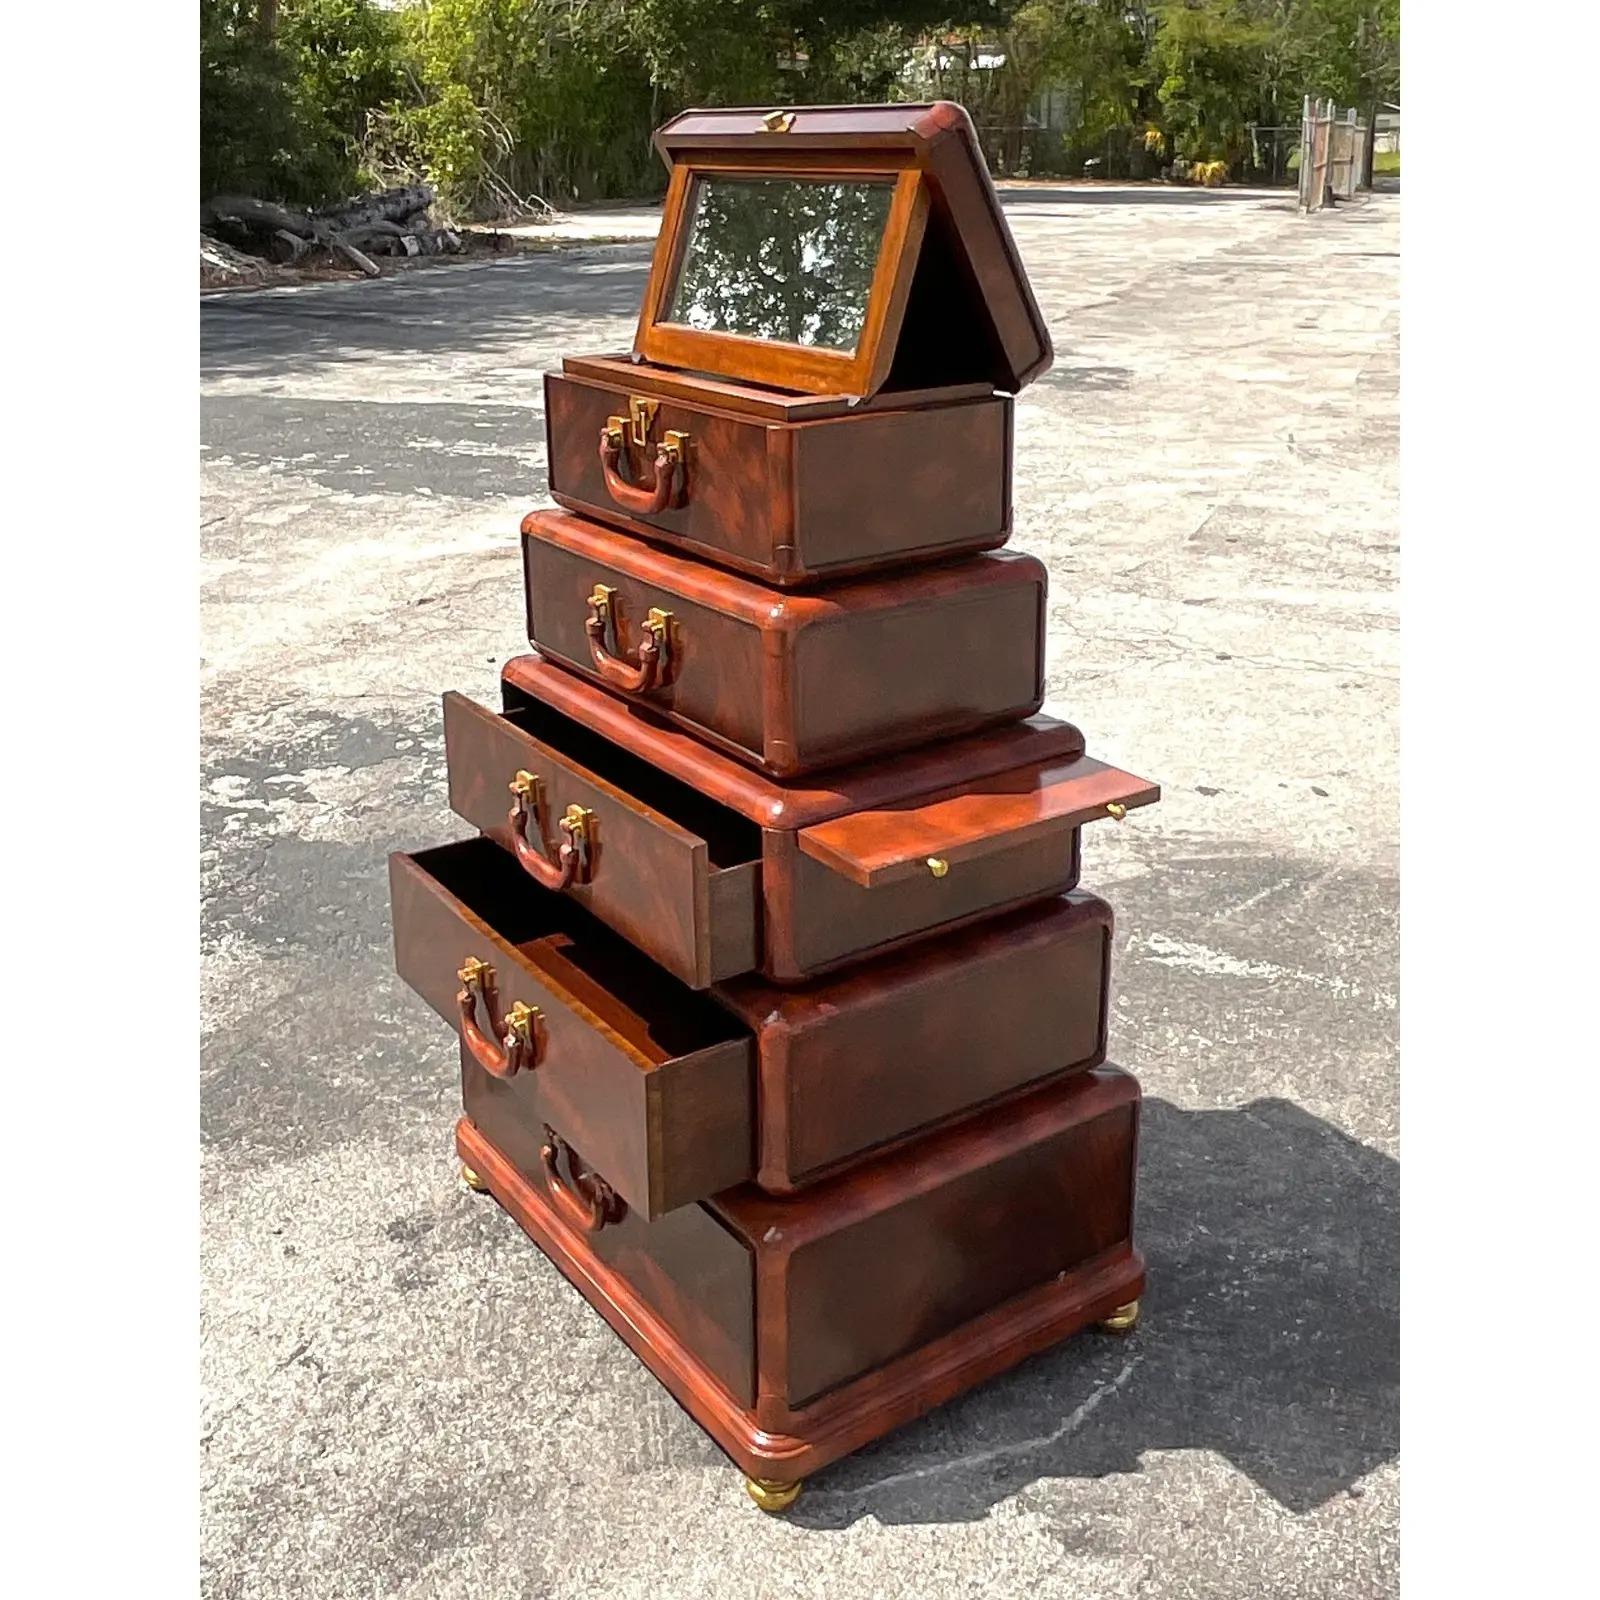 Stunning vintage Regency chest of drawers. Made by the iconic Maitland Smith group. Beautiful Flame mahogany with leather trim. Charming stacked luggage design with all kinds of drawers, pull out trays and pop up mirrors. A really magical piece.